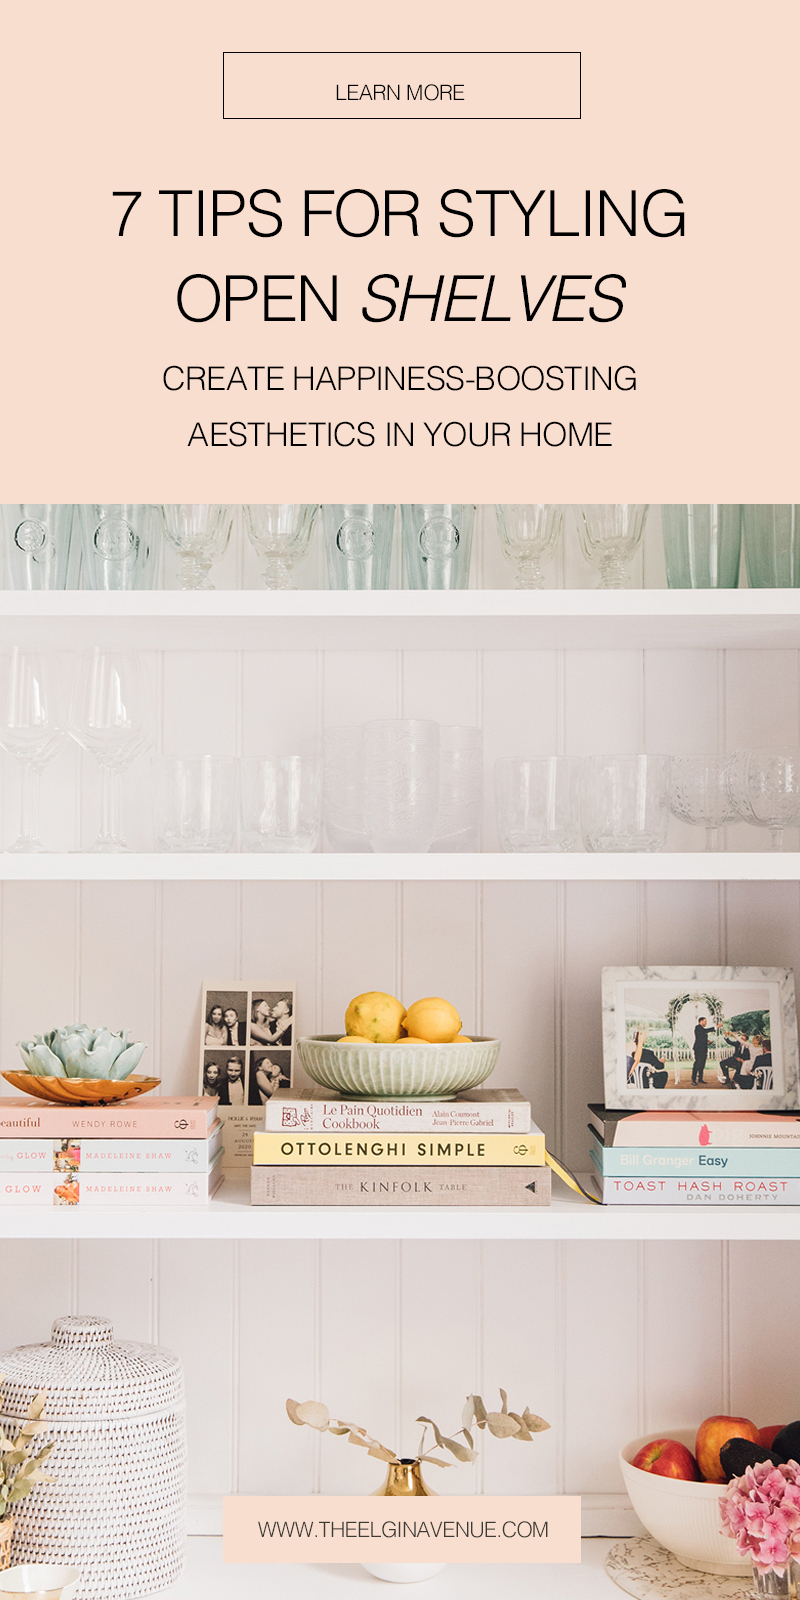 7 Tips For Styling Open Shelves In Your Home - Via The Elgin Avenue Blog